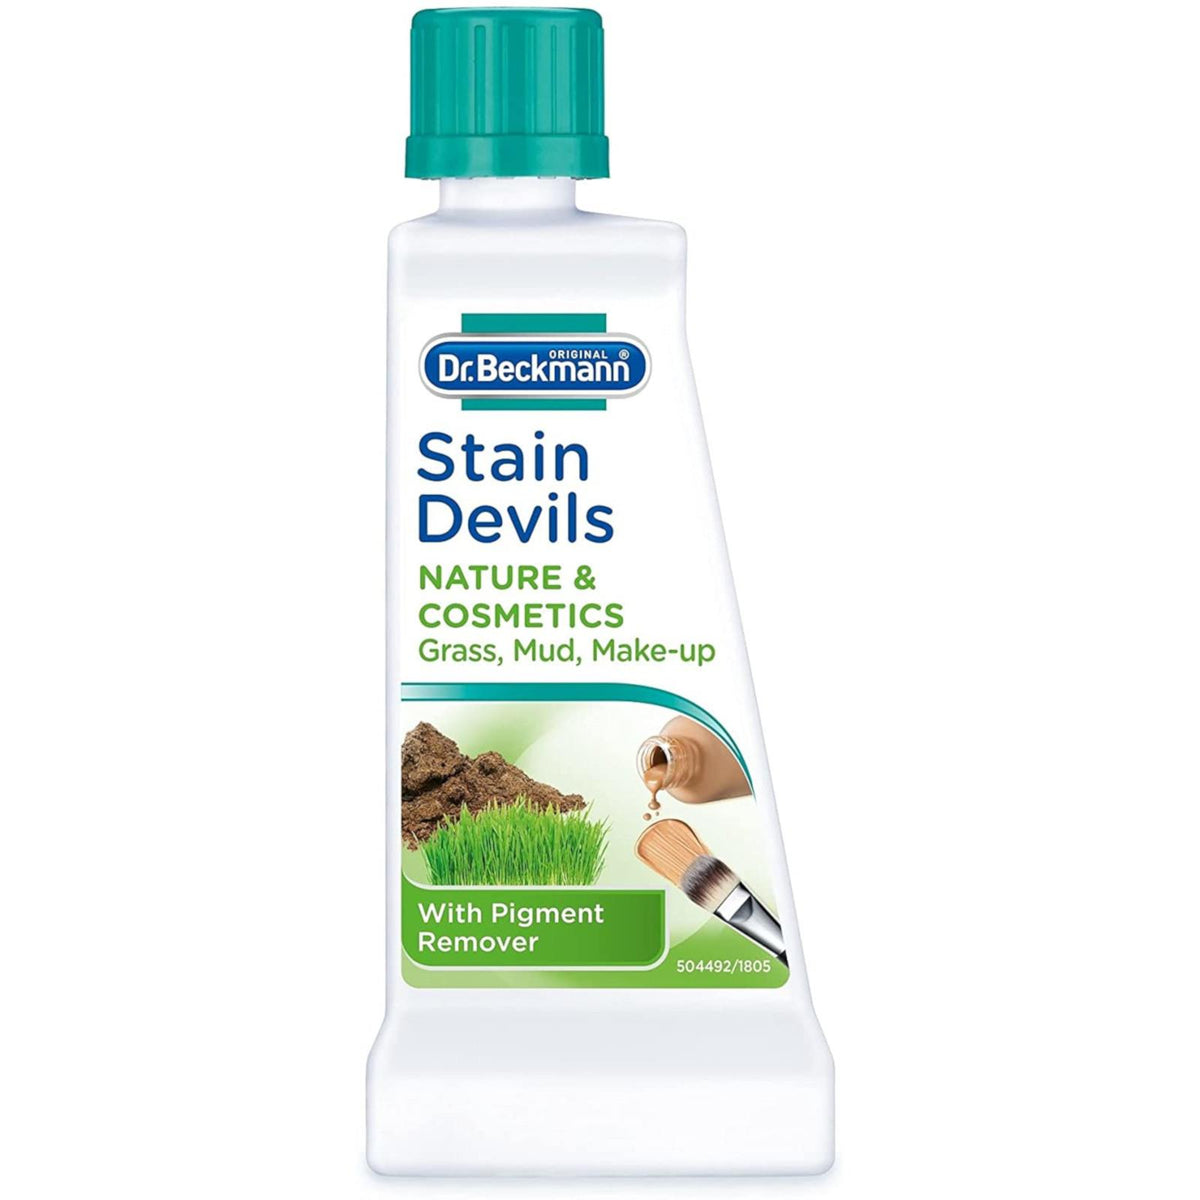 Buy Dr. Beckmann Stain Devils Pre-Wash Stain Remover 250 ml